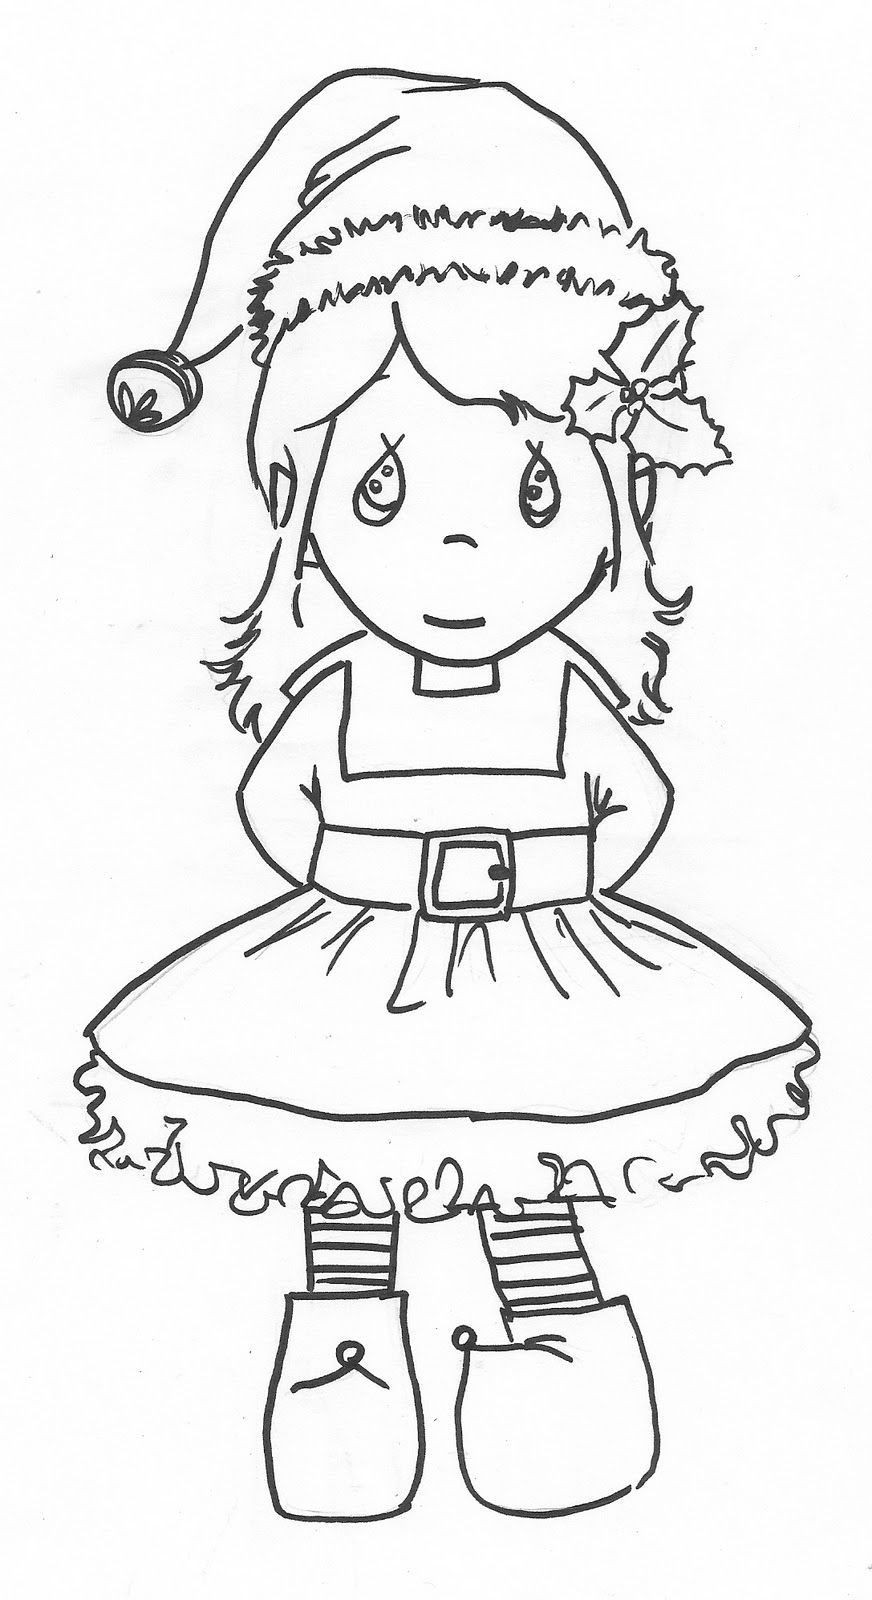 13 Pics of Cute Girl Elf Coloring Pages - Christmas Elves Girl ...